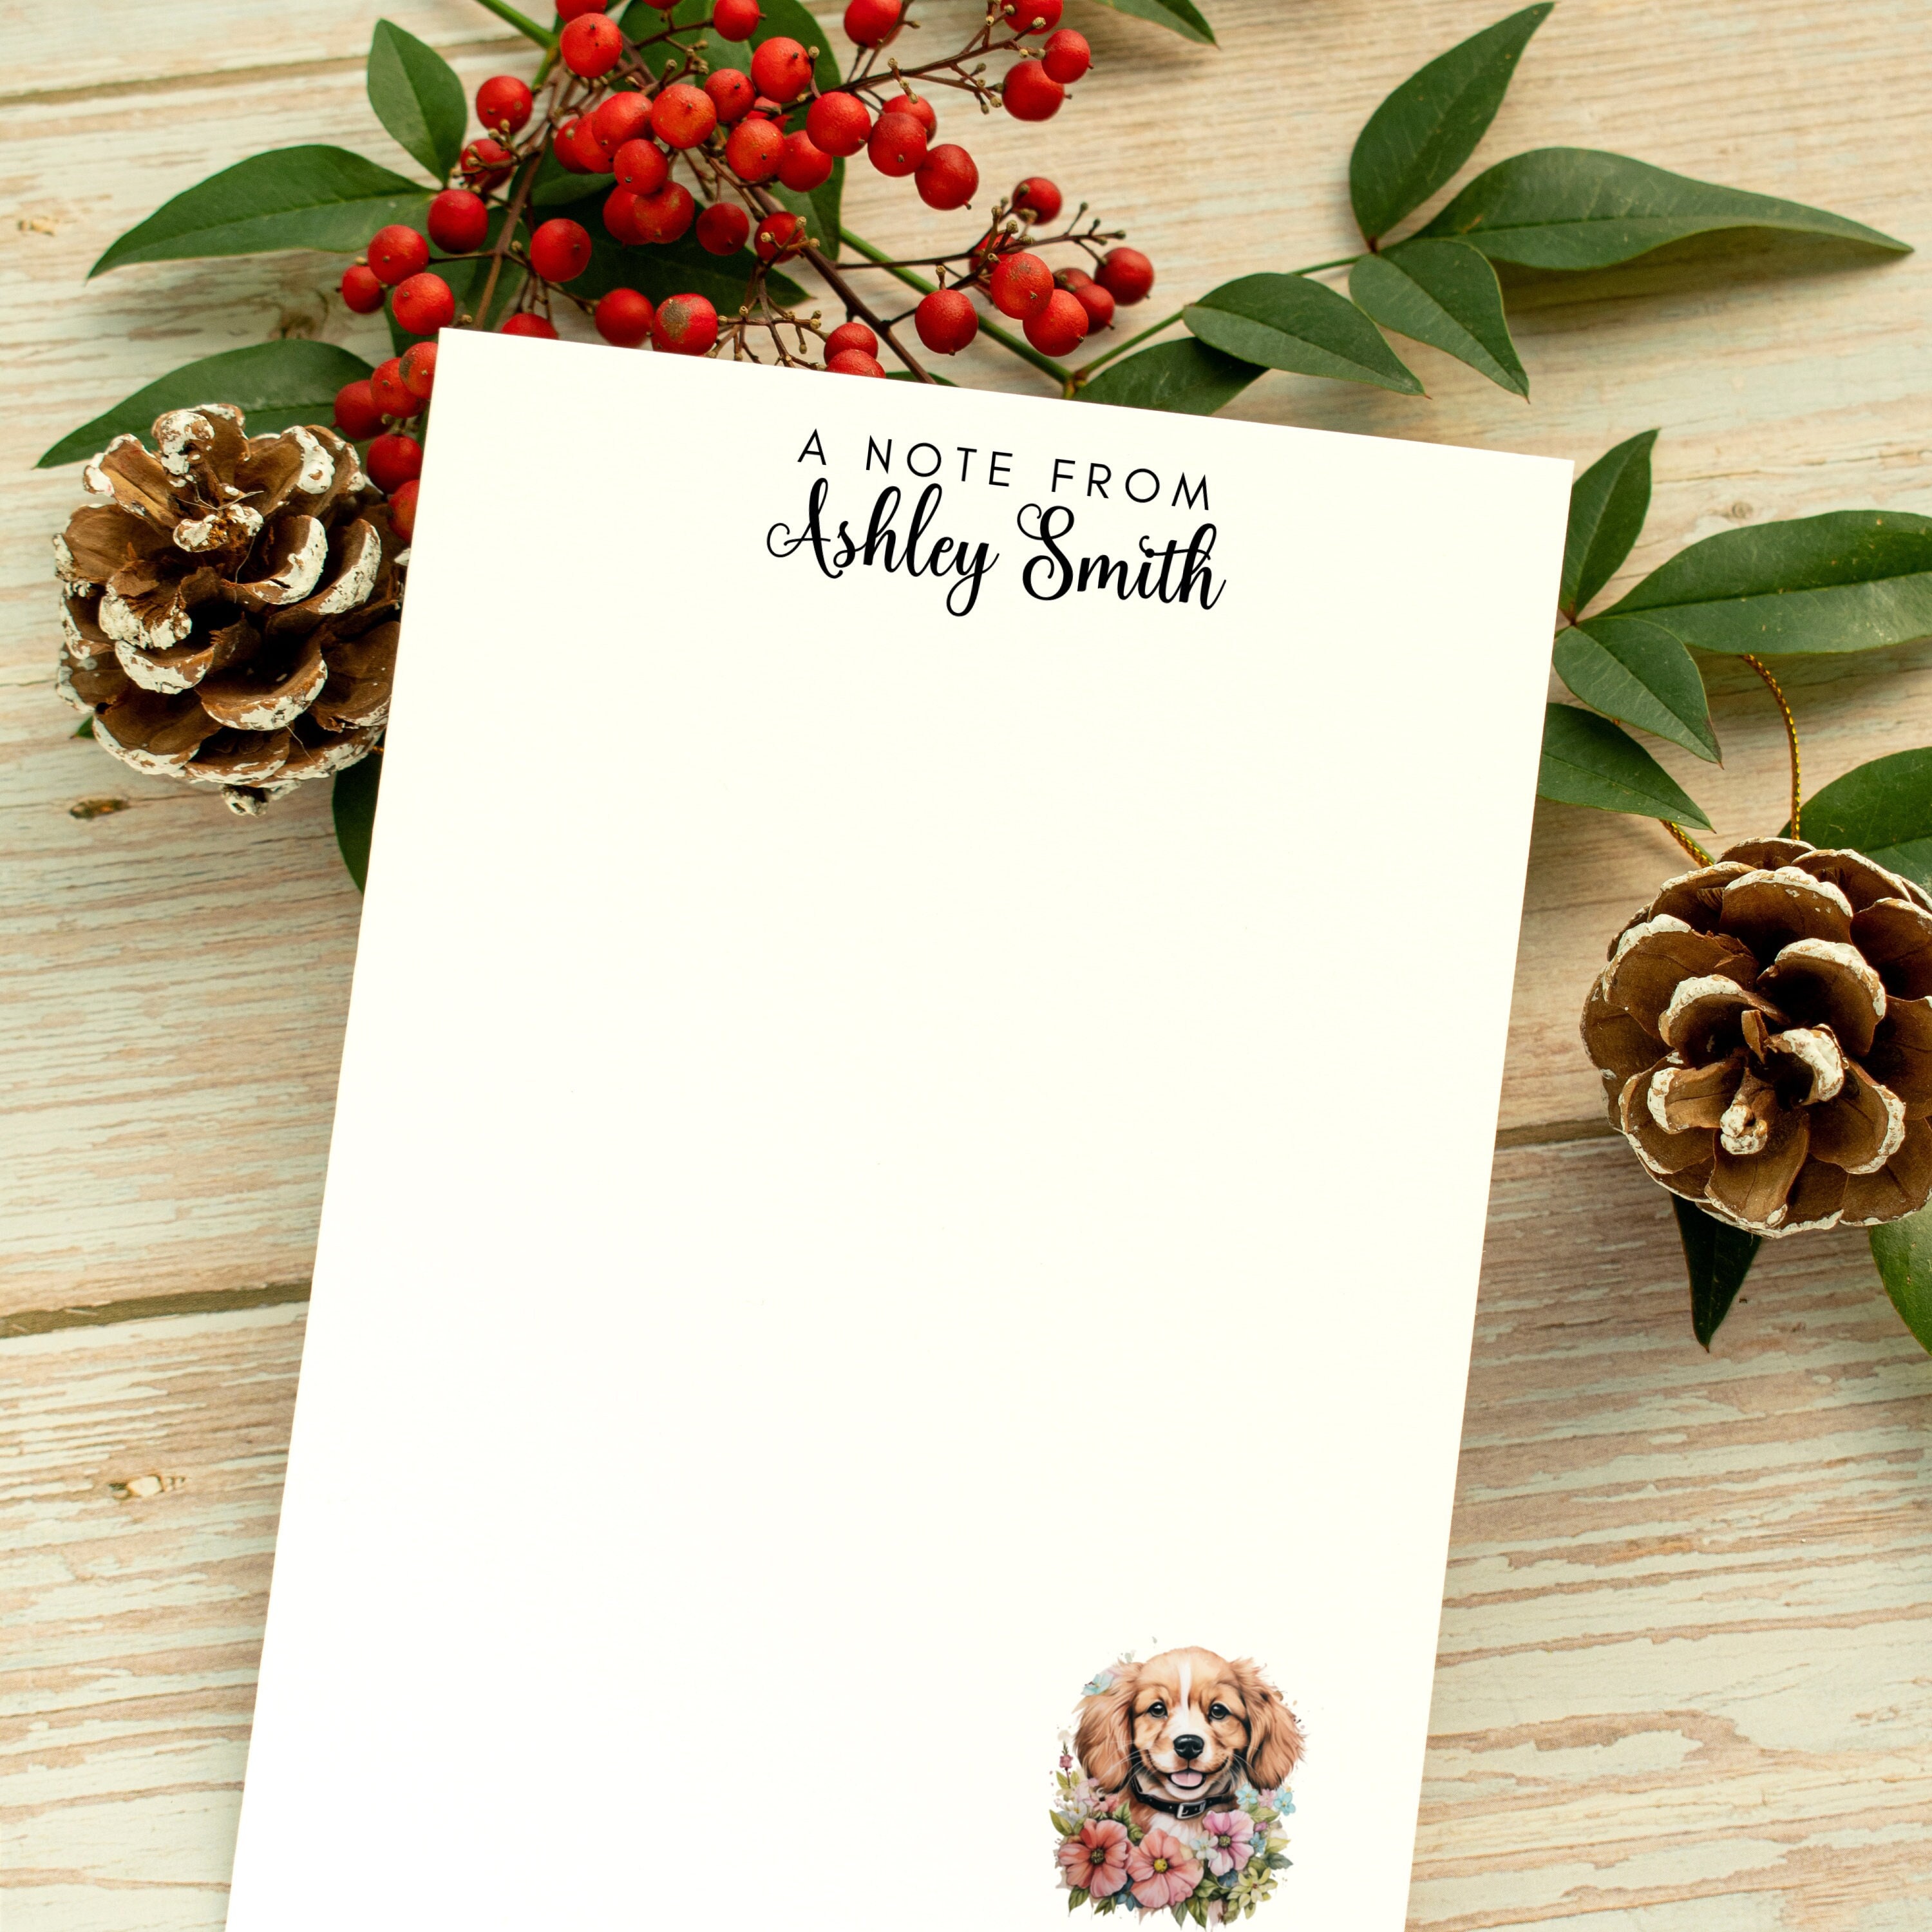 Personalized Stationery - Set of 10 Flat Note Cards